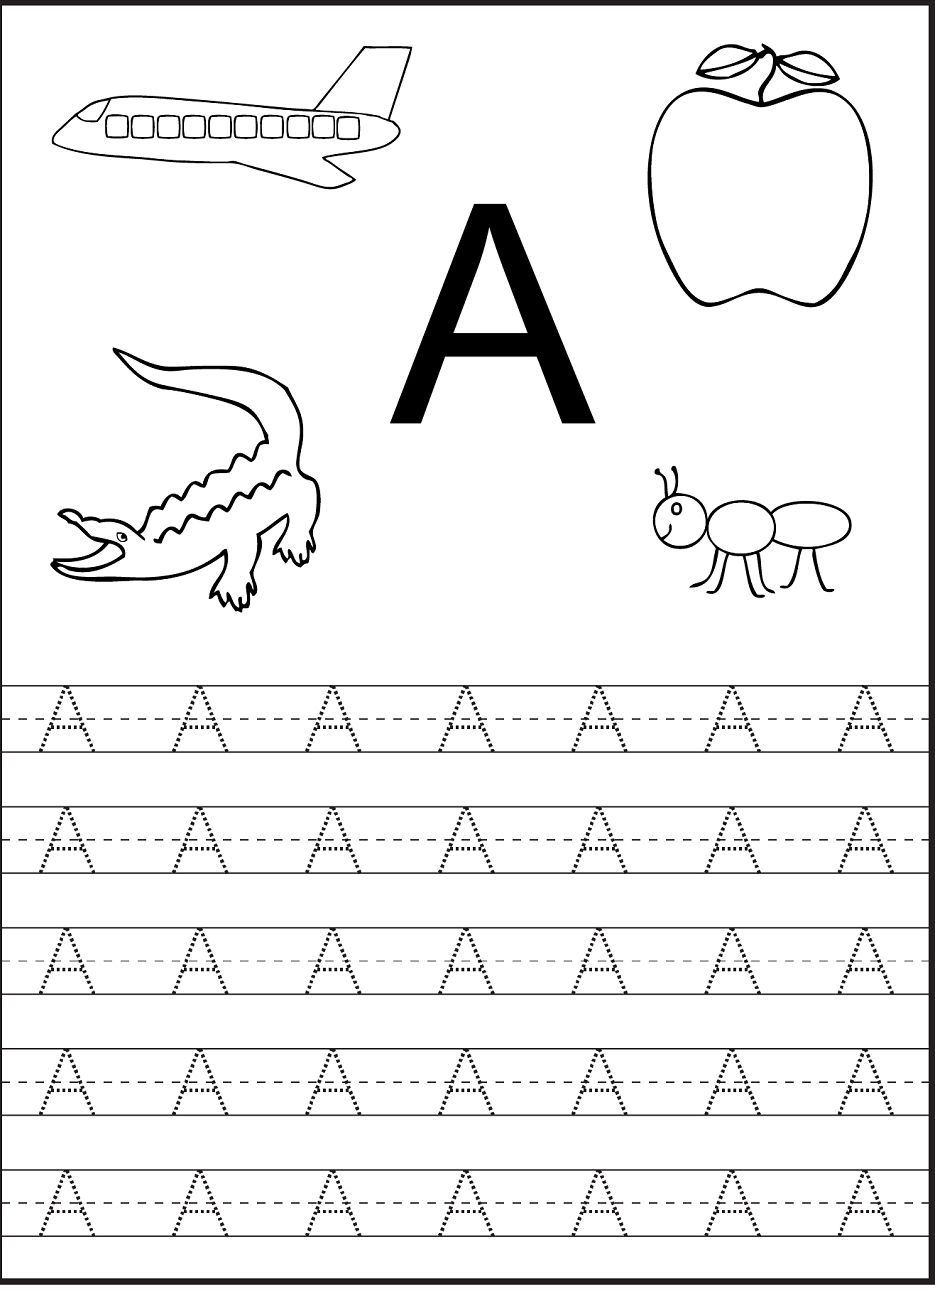 Tracing The Letter A Free Printable | Druckvorlage intended for A Letter Tracing Worksheet